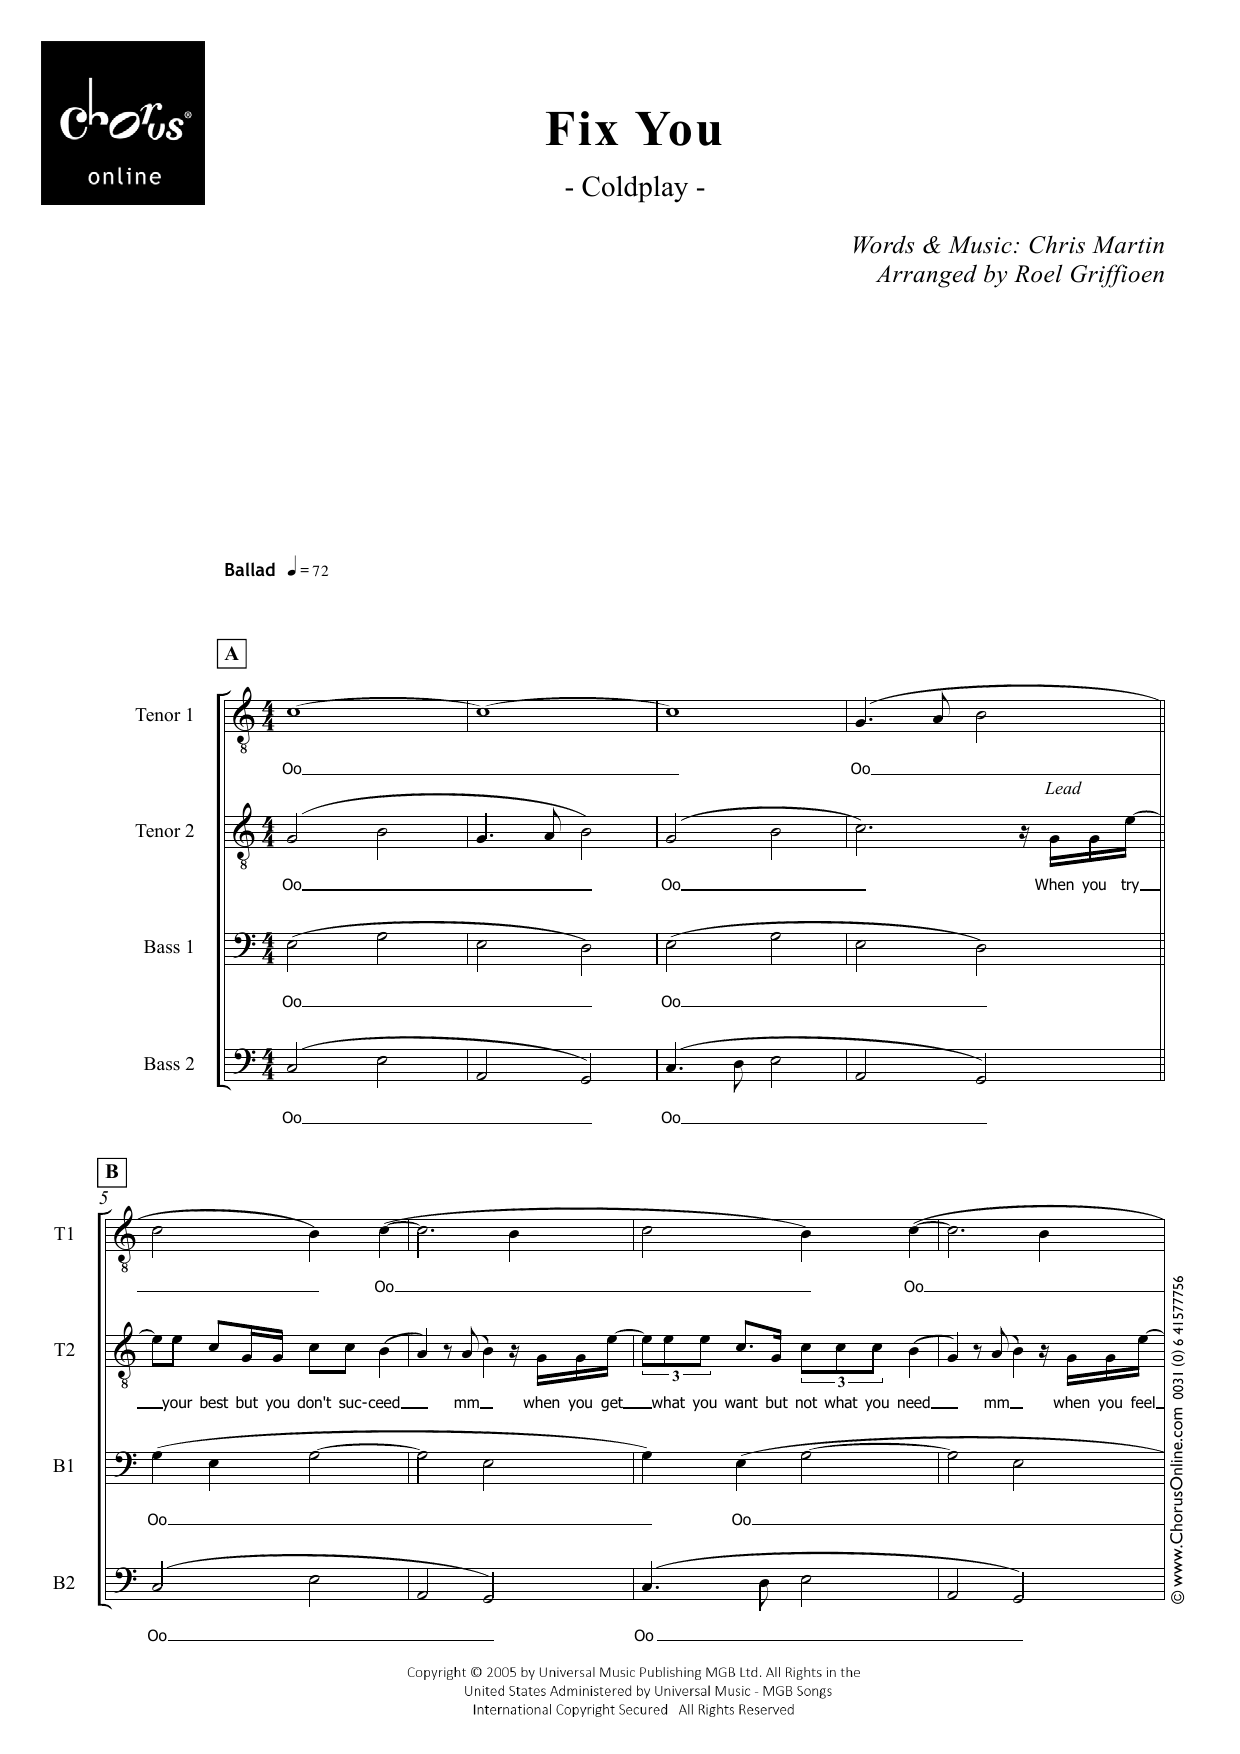 Coldplay Fix You (arr. Roel Griffioen) sheet music notes printable PDF score